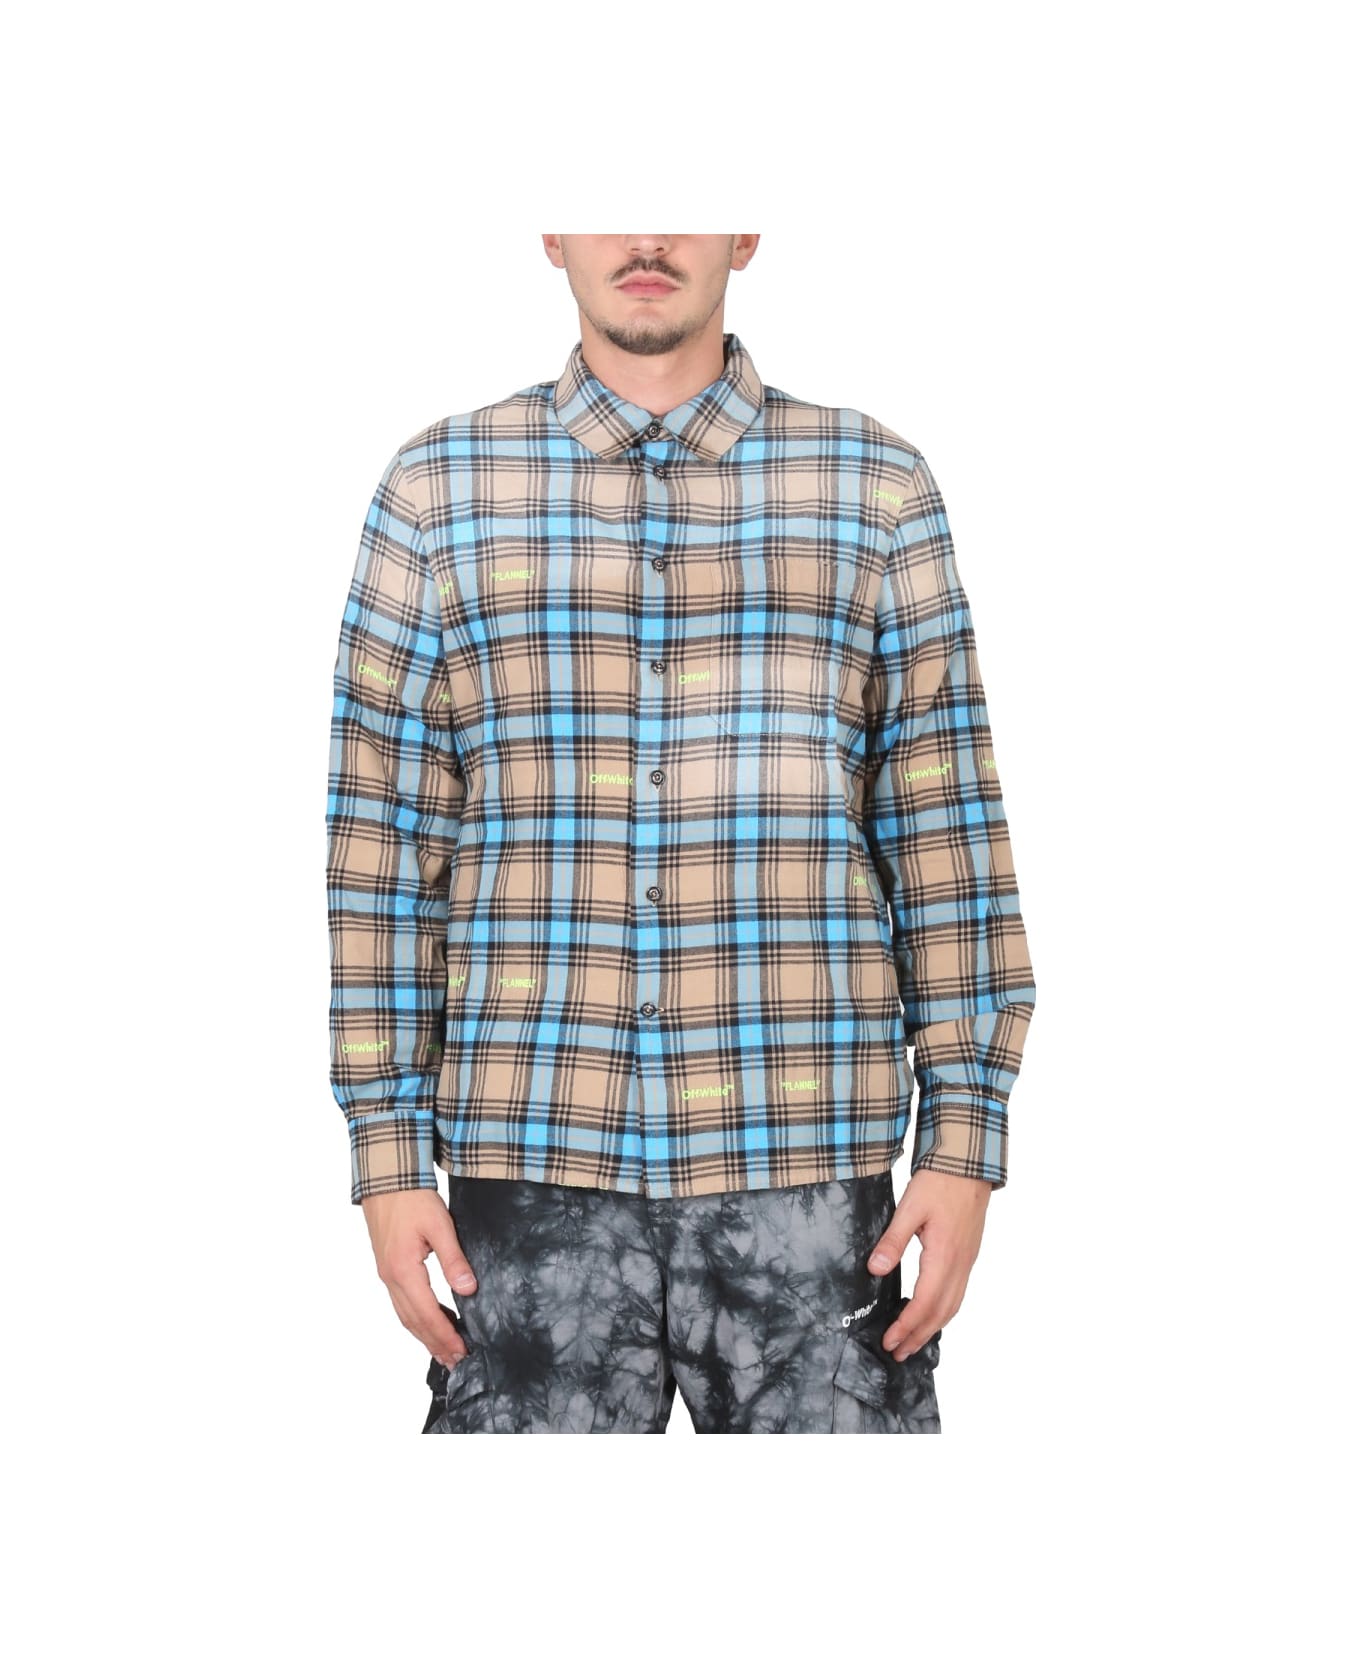 Off-White Shirt With Check Pattern - BEIGE